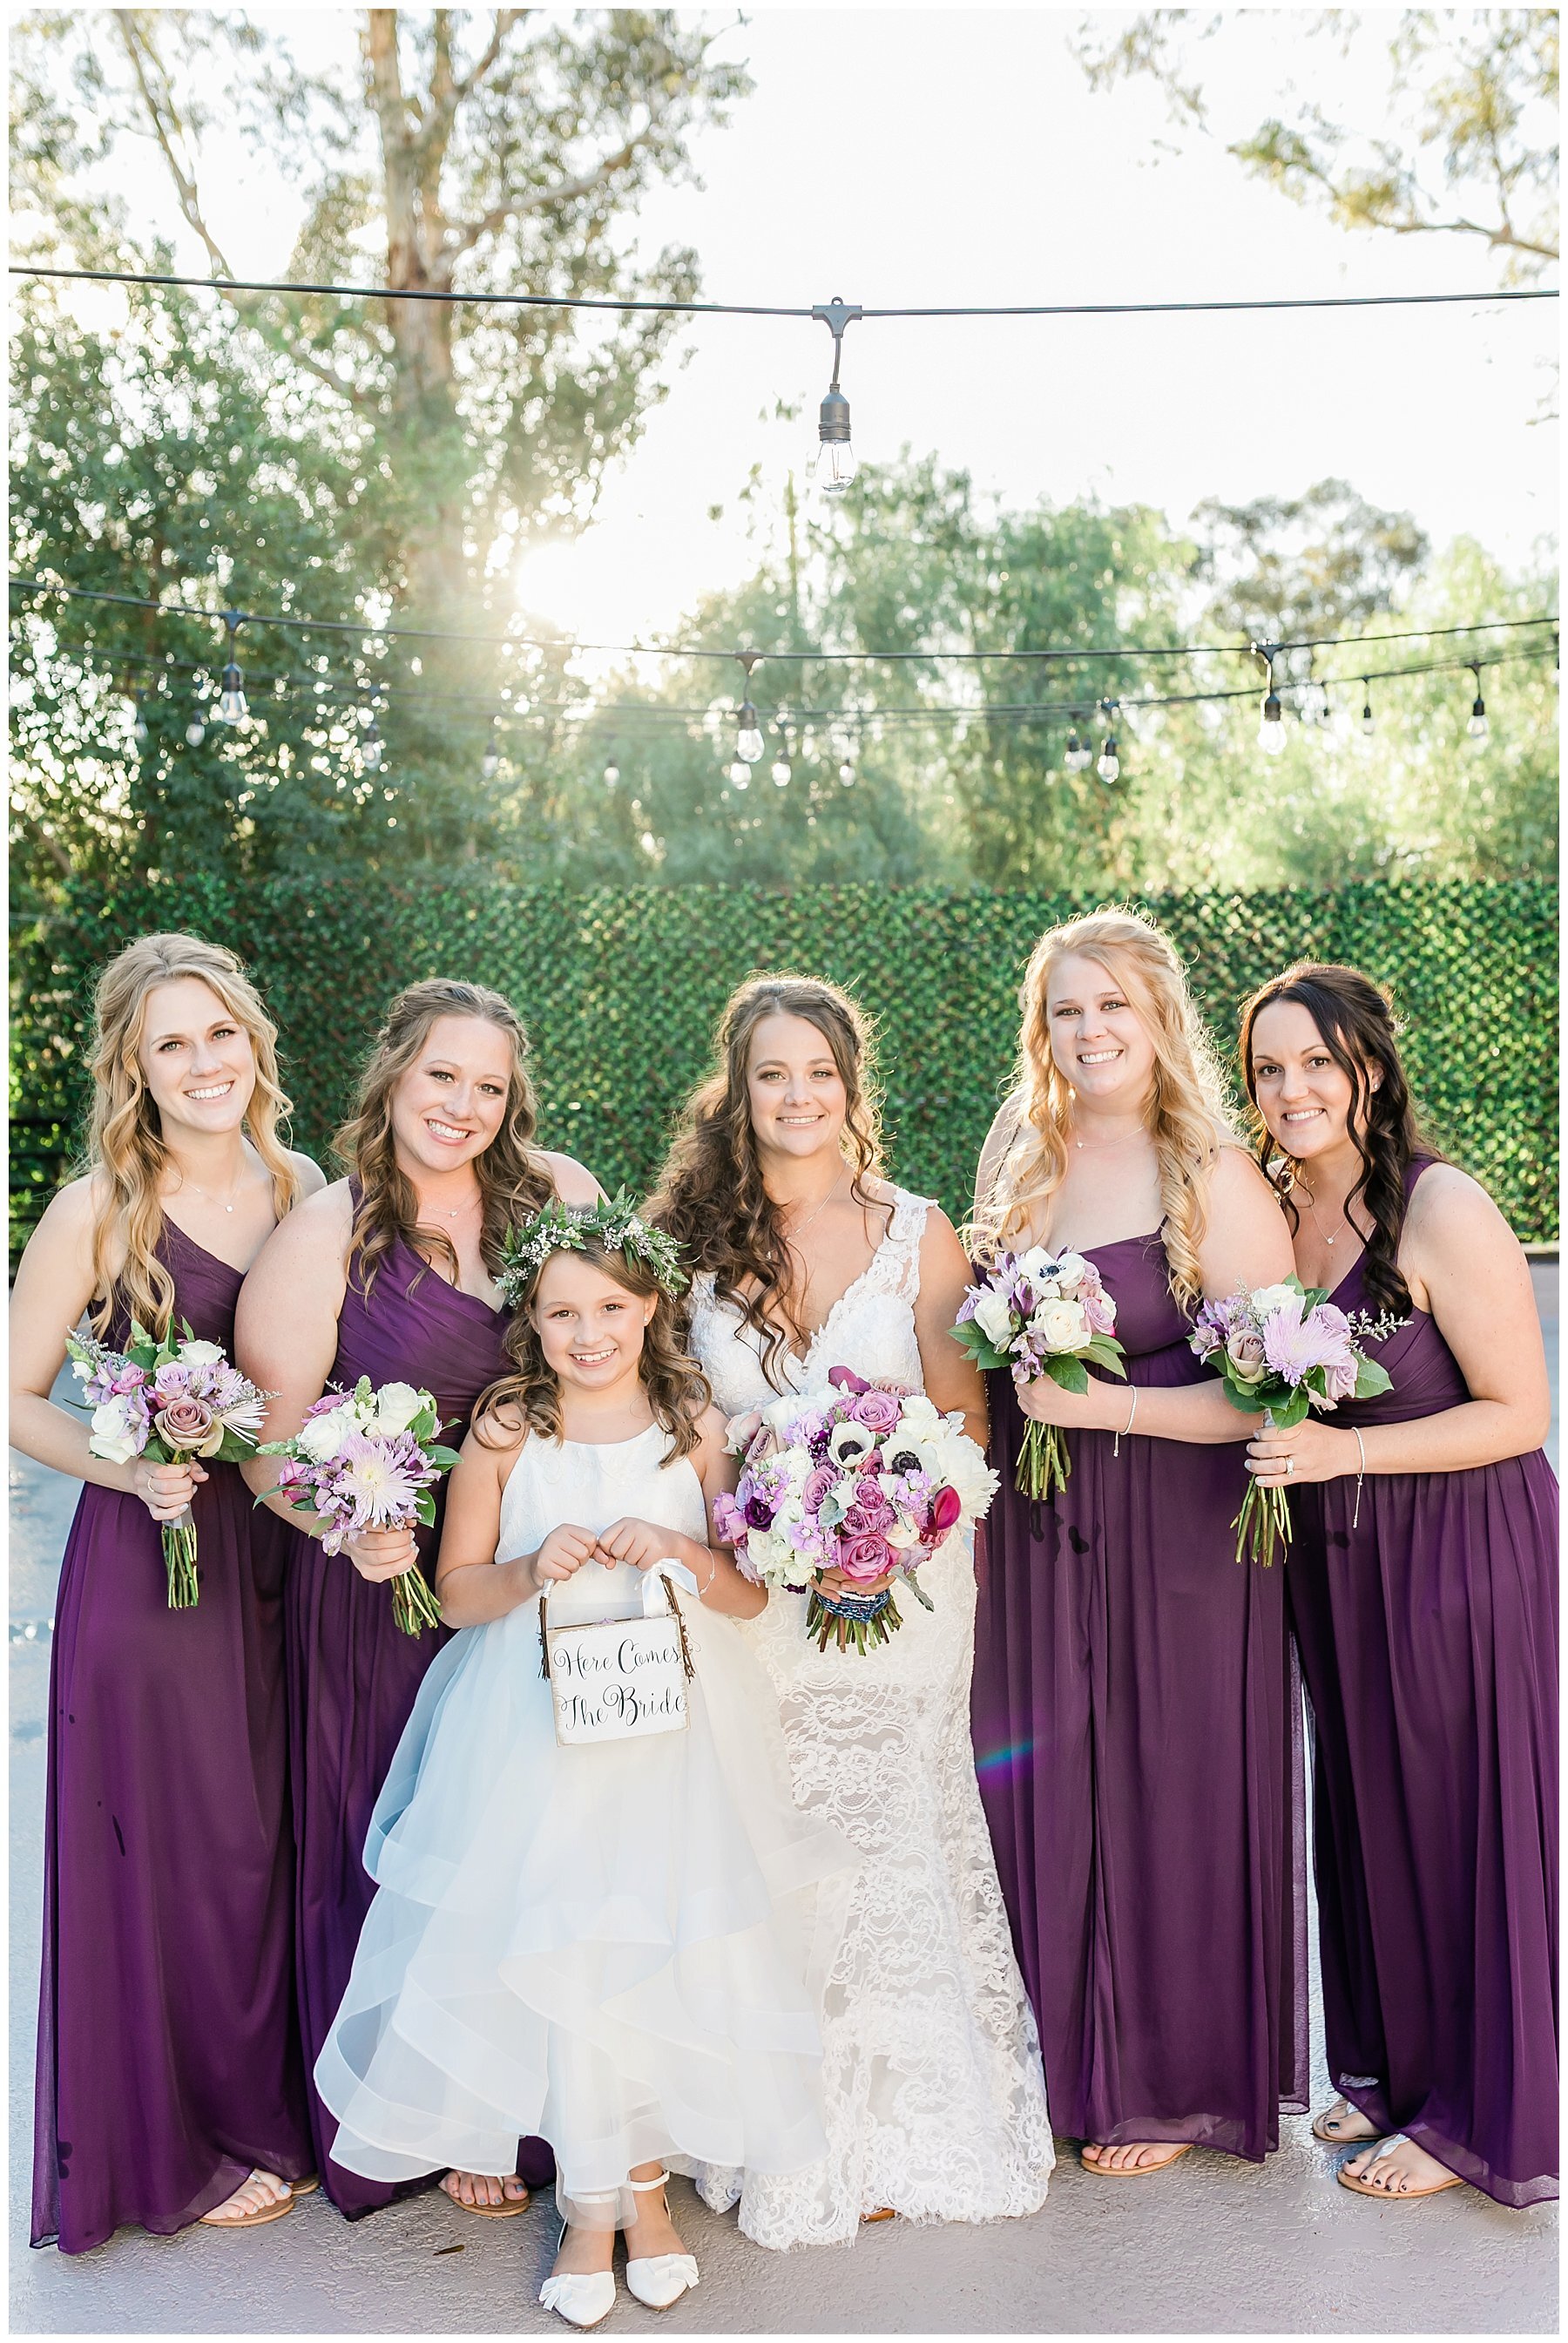  bride with her bridal party  